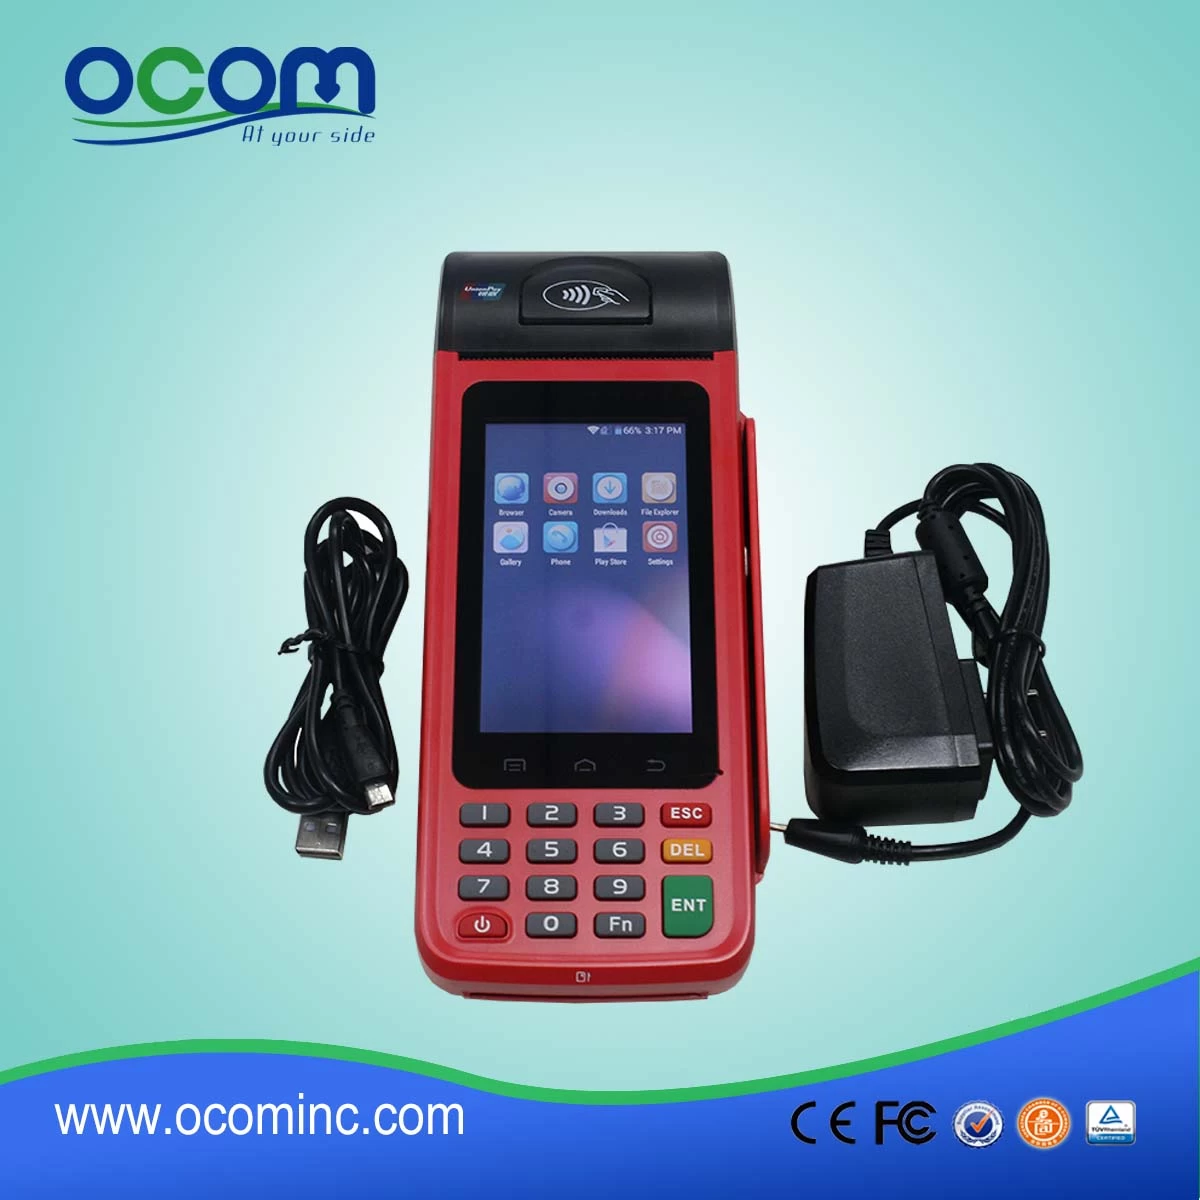 P8000 Mobile Android Handheld Data POS Terminal with Printer